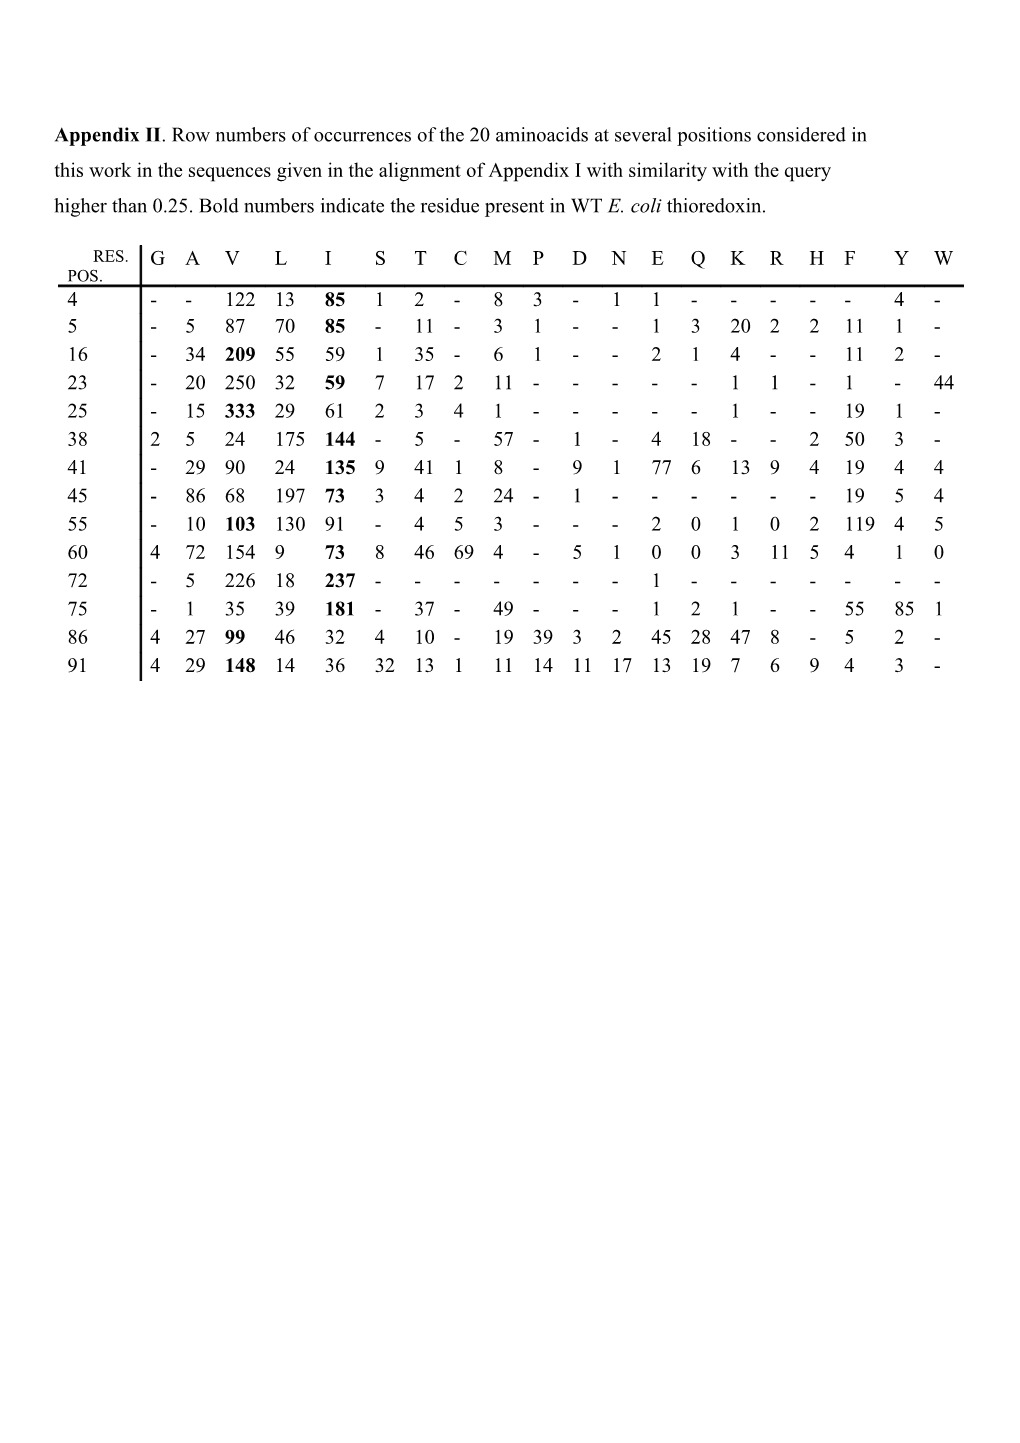 Appendix II. Row Numbers of Occurrences of the 20 Aminoacids at Several Positions Considered